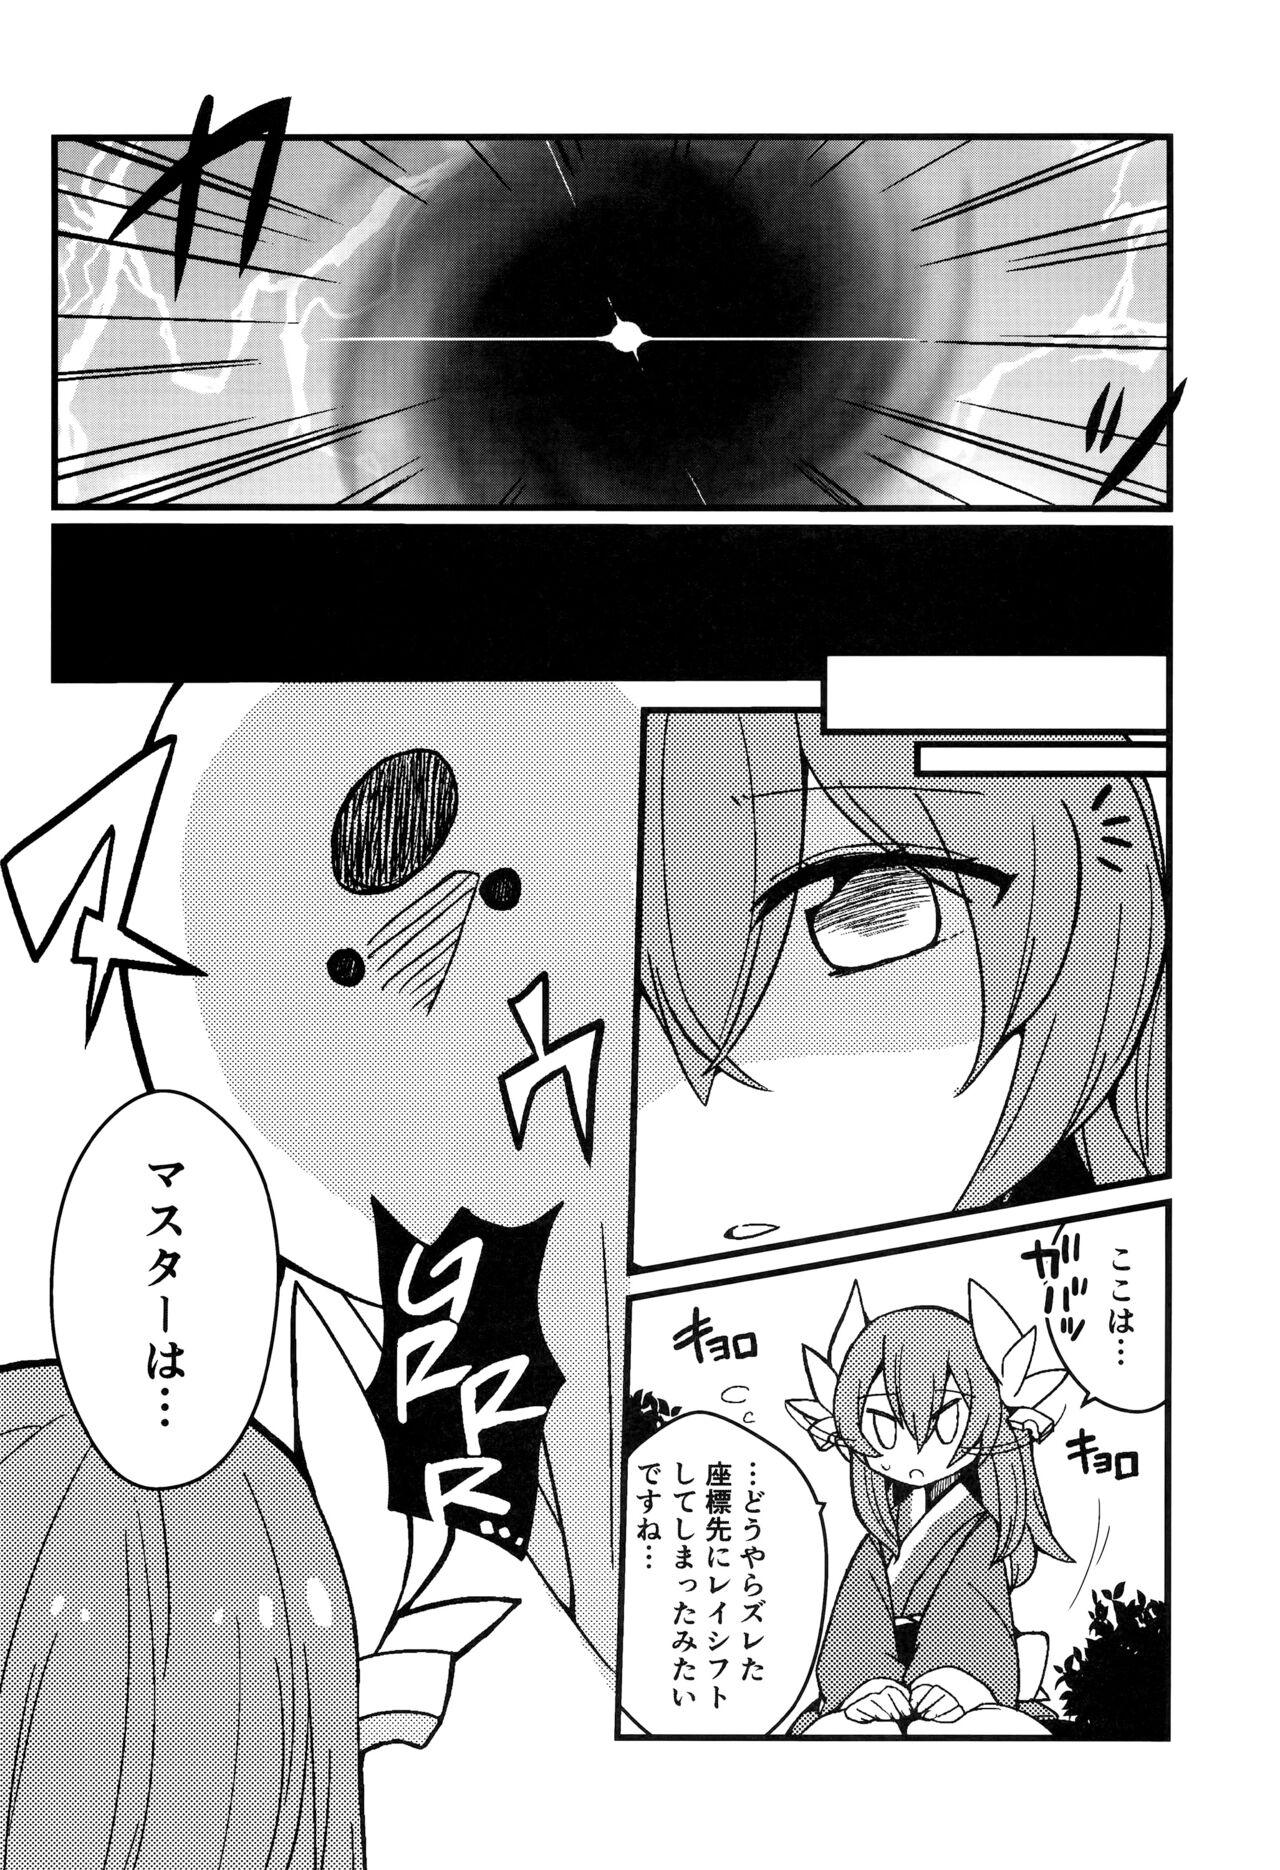 Transsexual Yume to Shiriseba - Fate grand order Office - Page 3